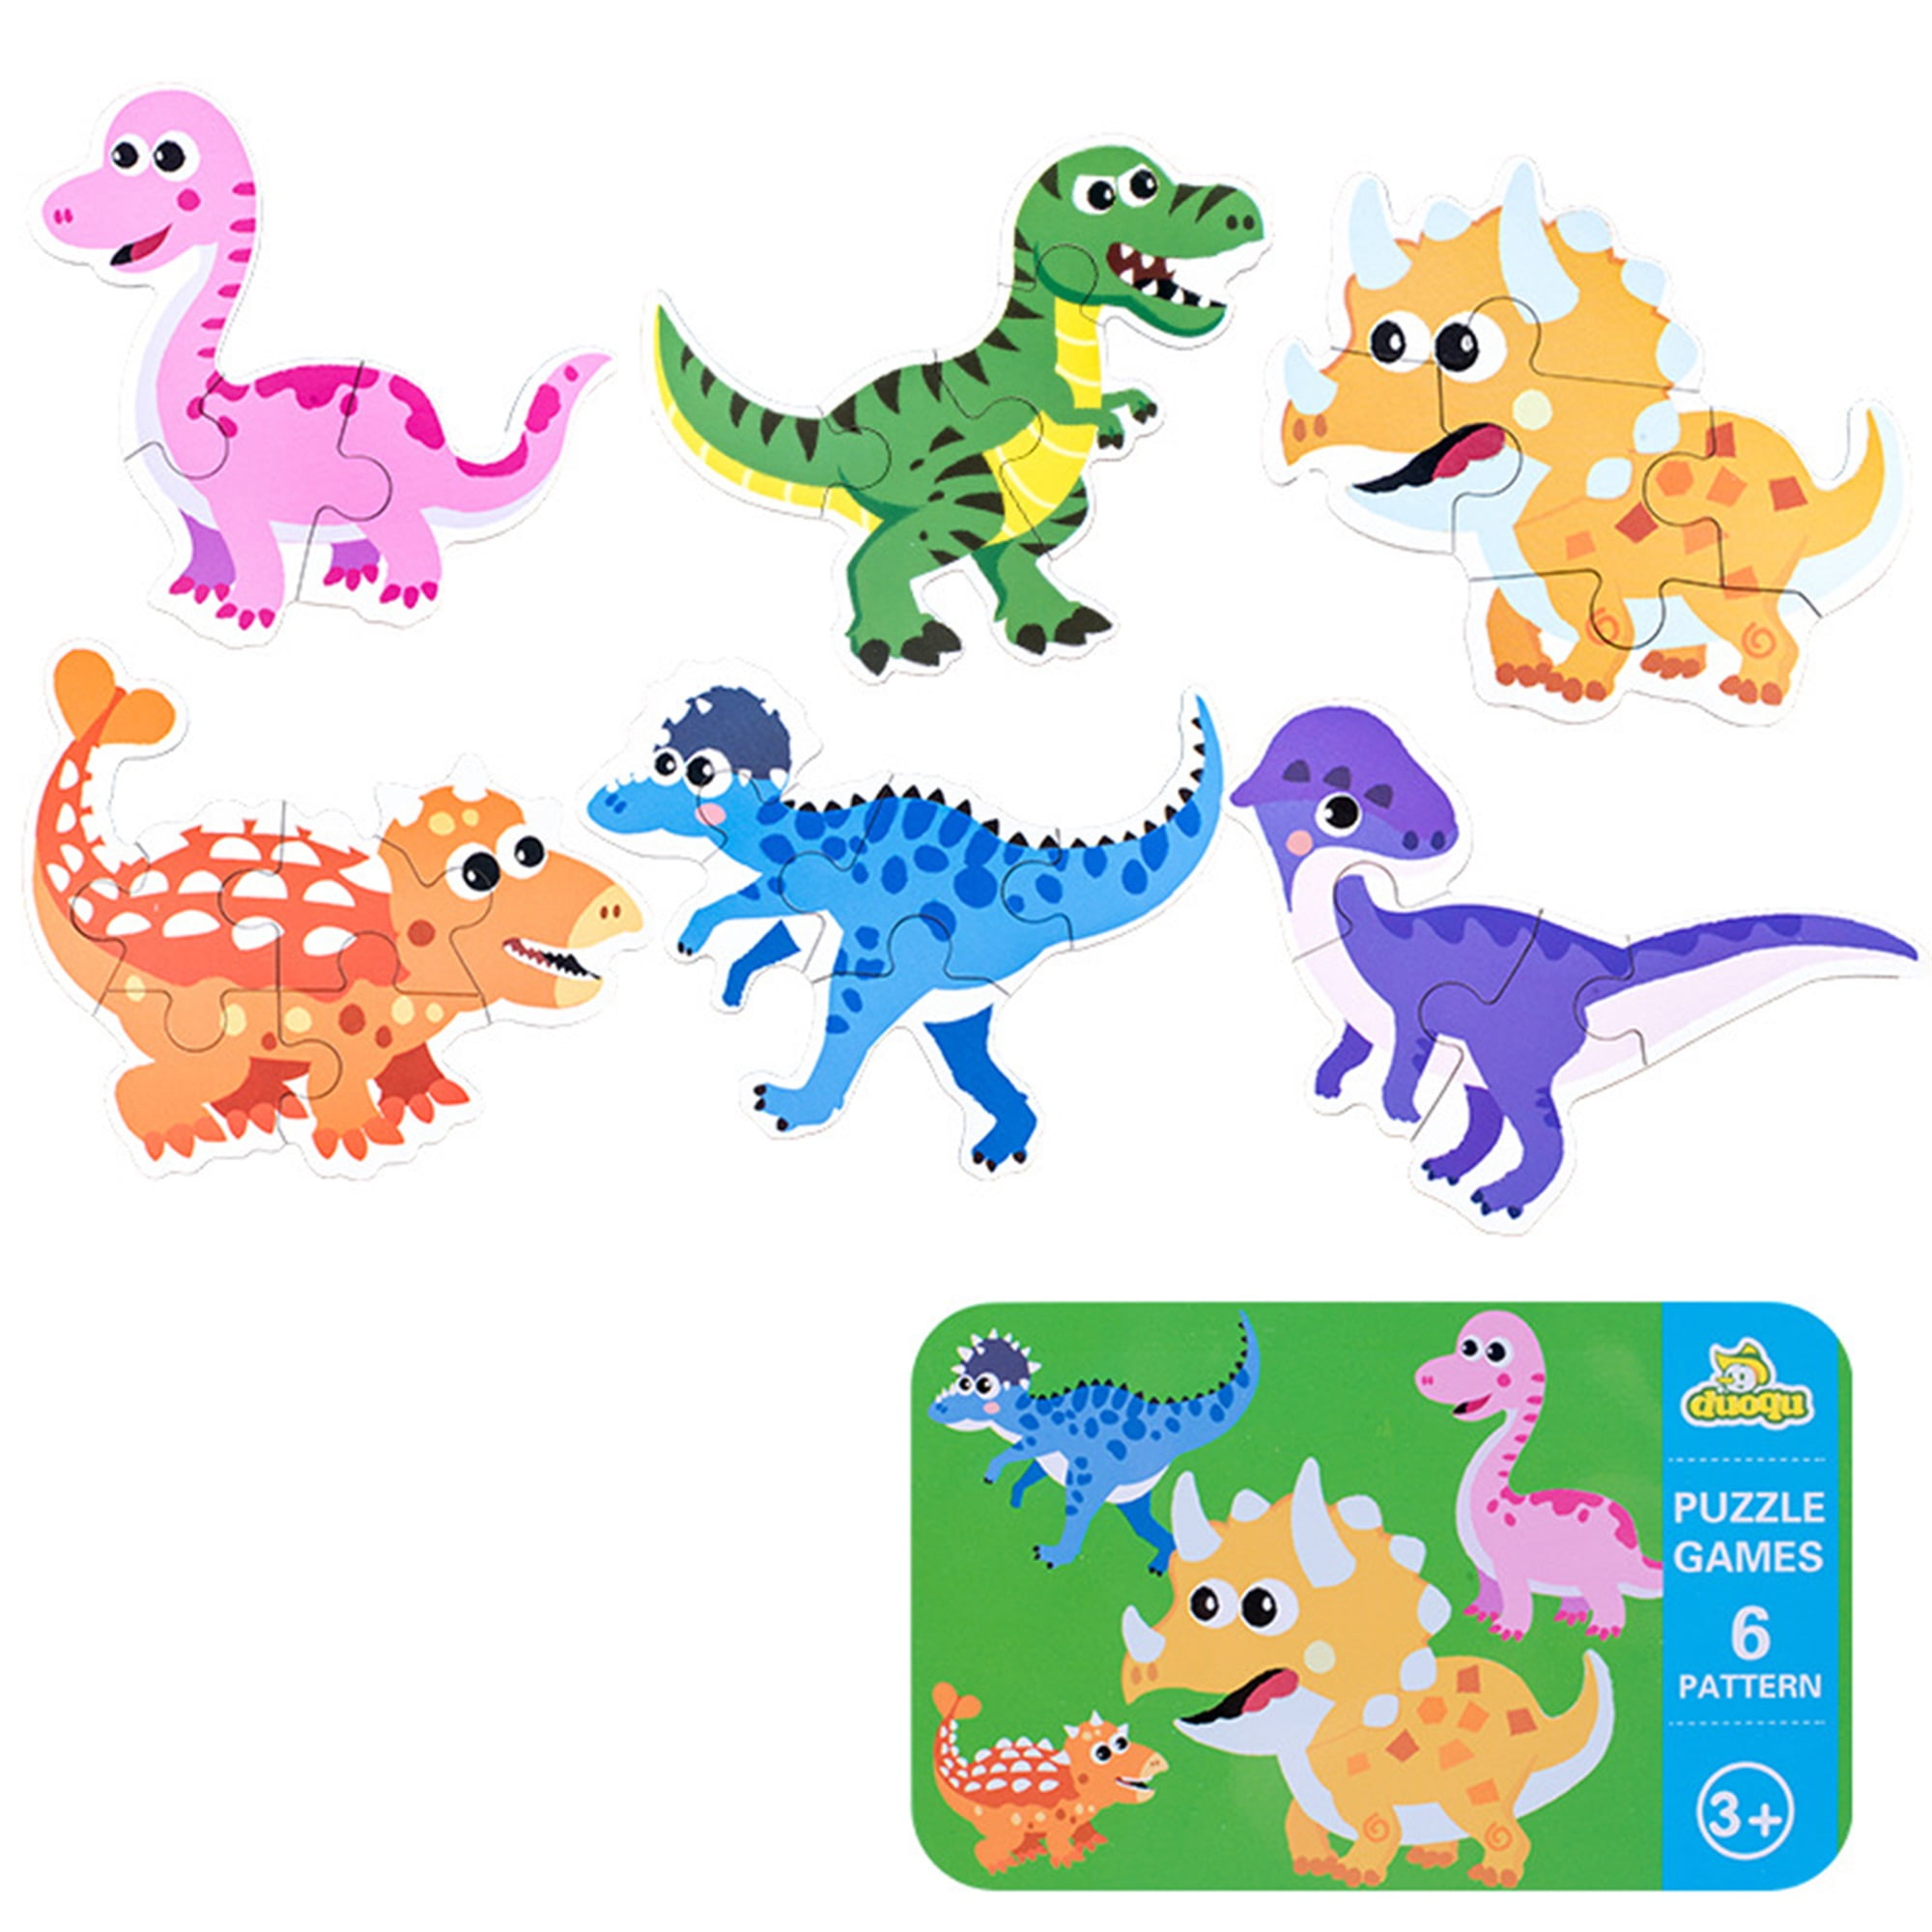 Details about   NEW KIDS EDUCATIONAL WOODEN PUZZLE JIGSAW BOYS GIRLS TOY ANIMAL FARM GIFT 